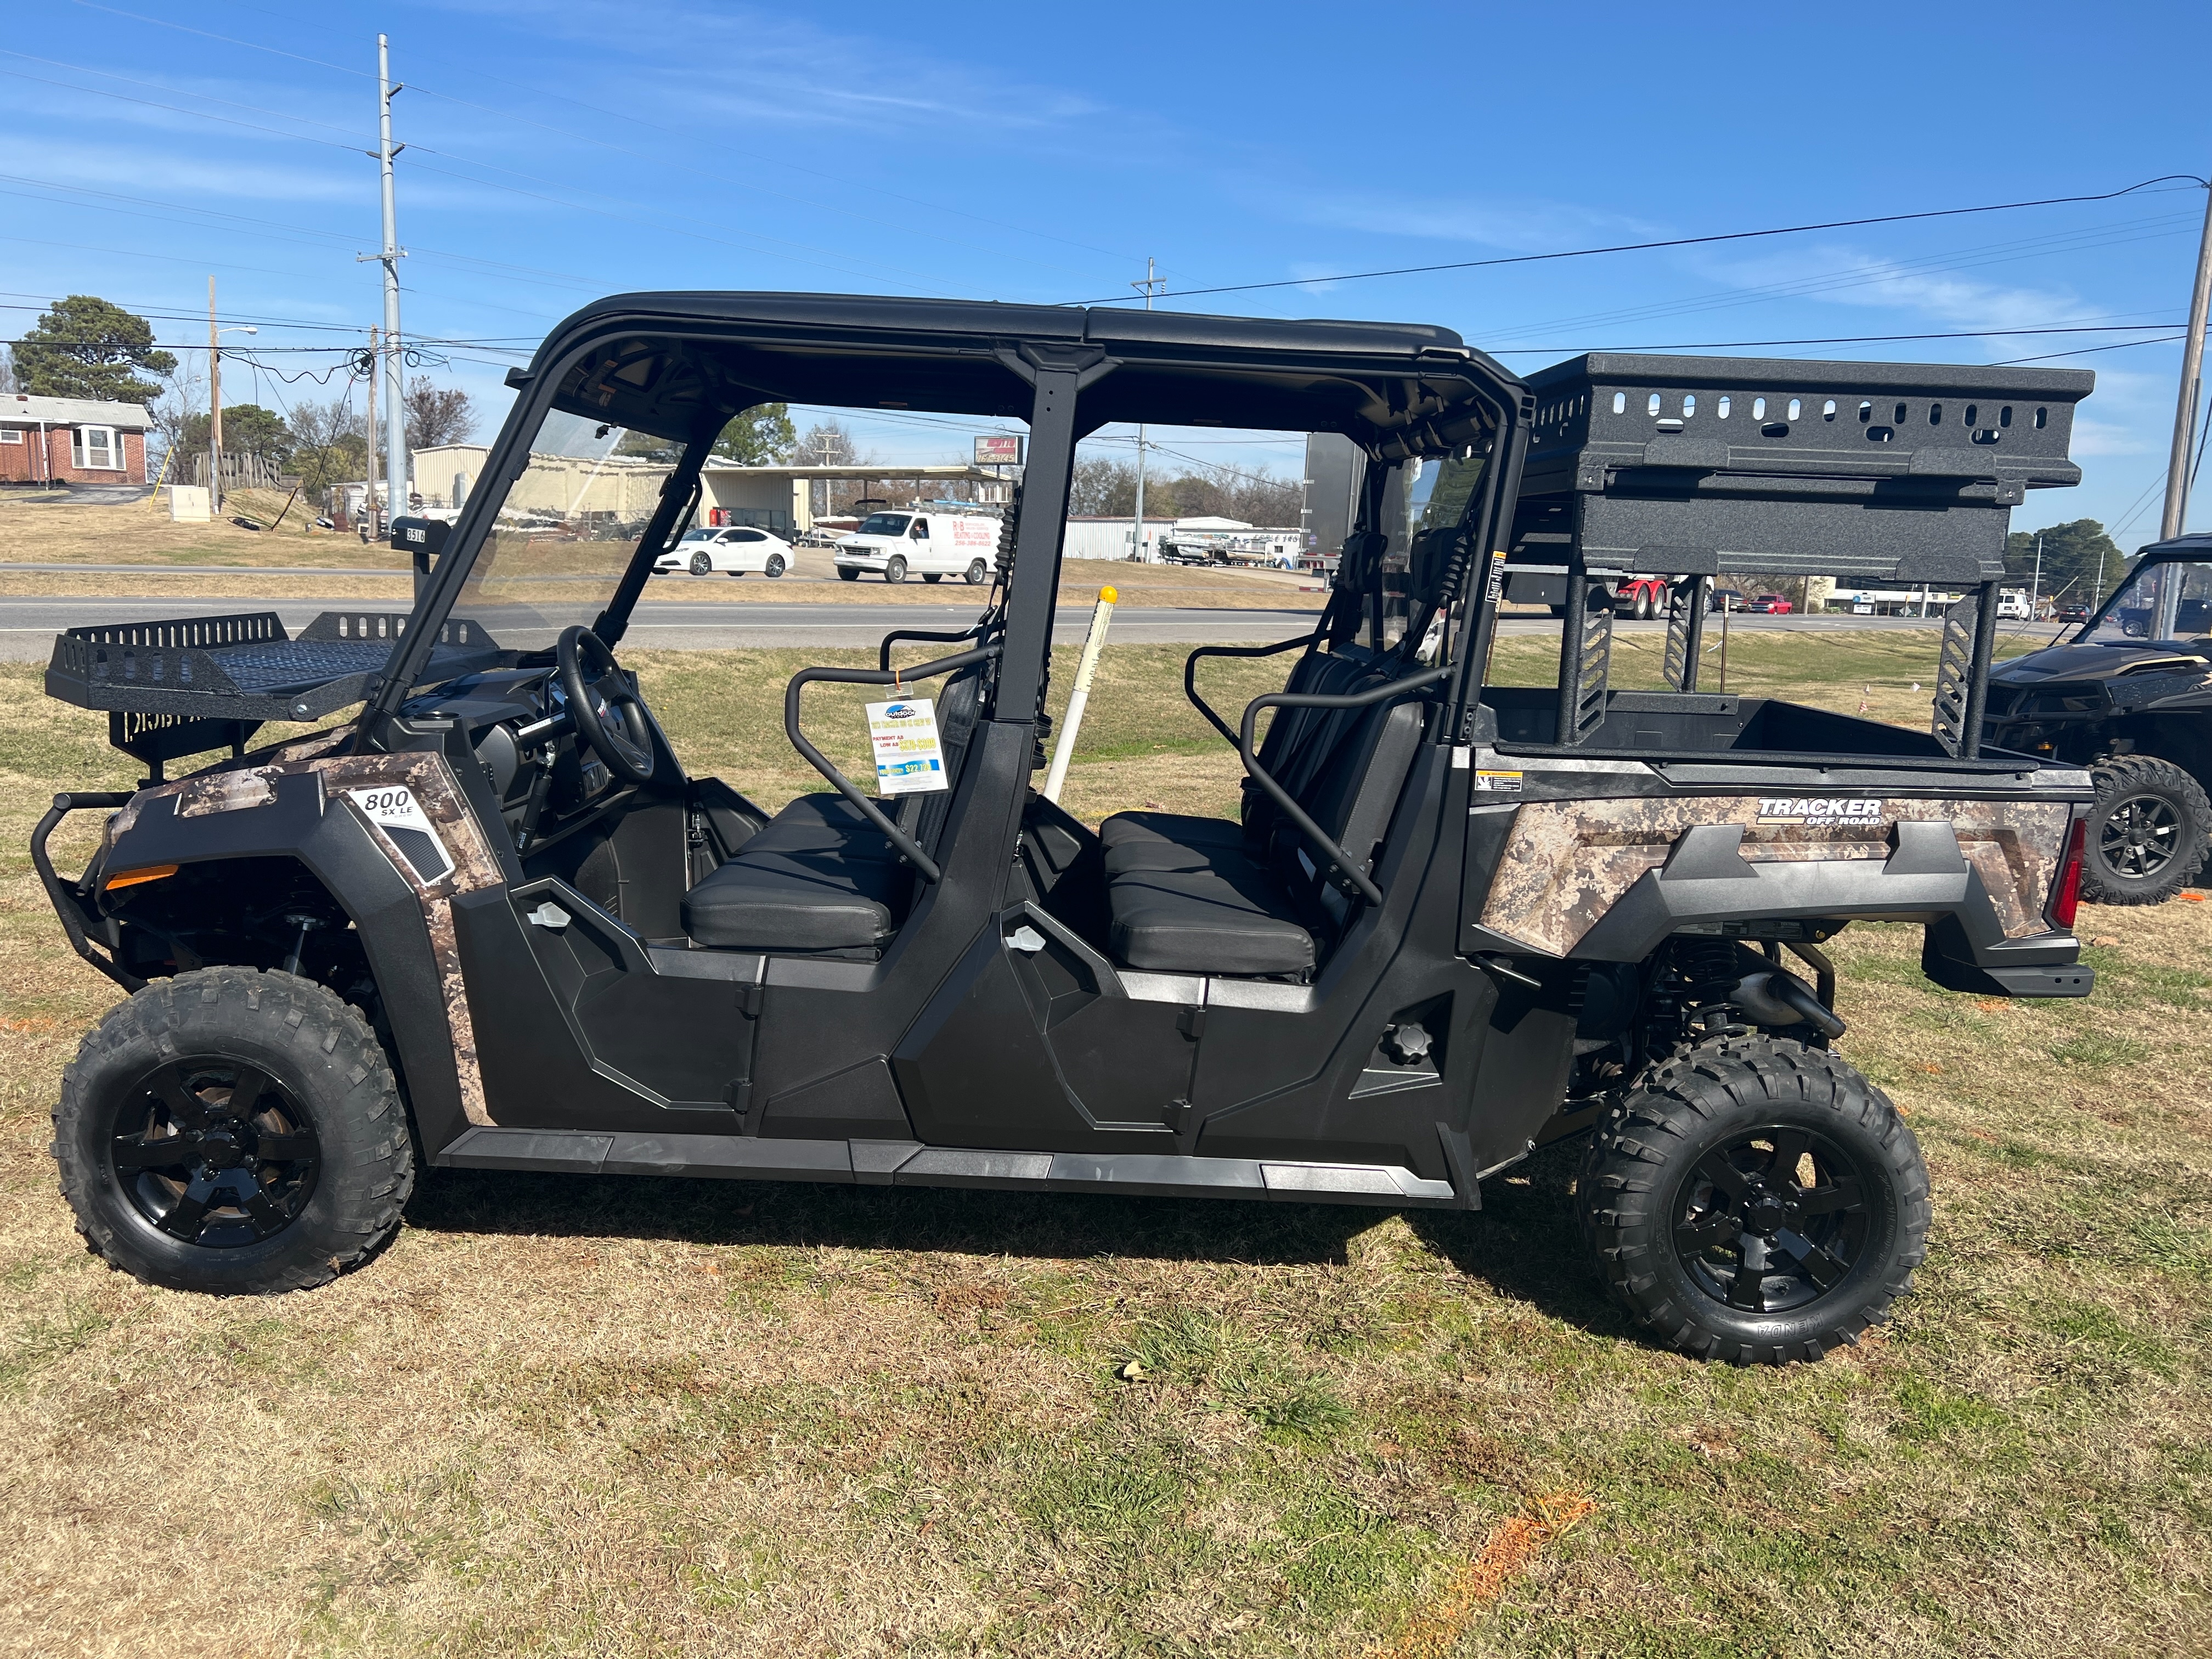 2023 TRACKER SXS 800SX CREW WATERFOWL at Shoal's Outdoor Sports - Florence